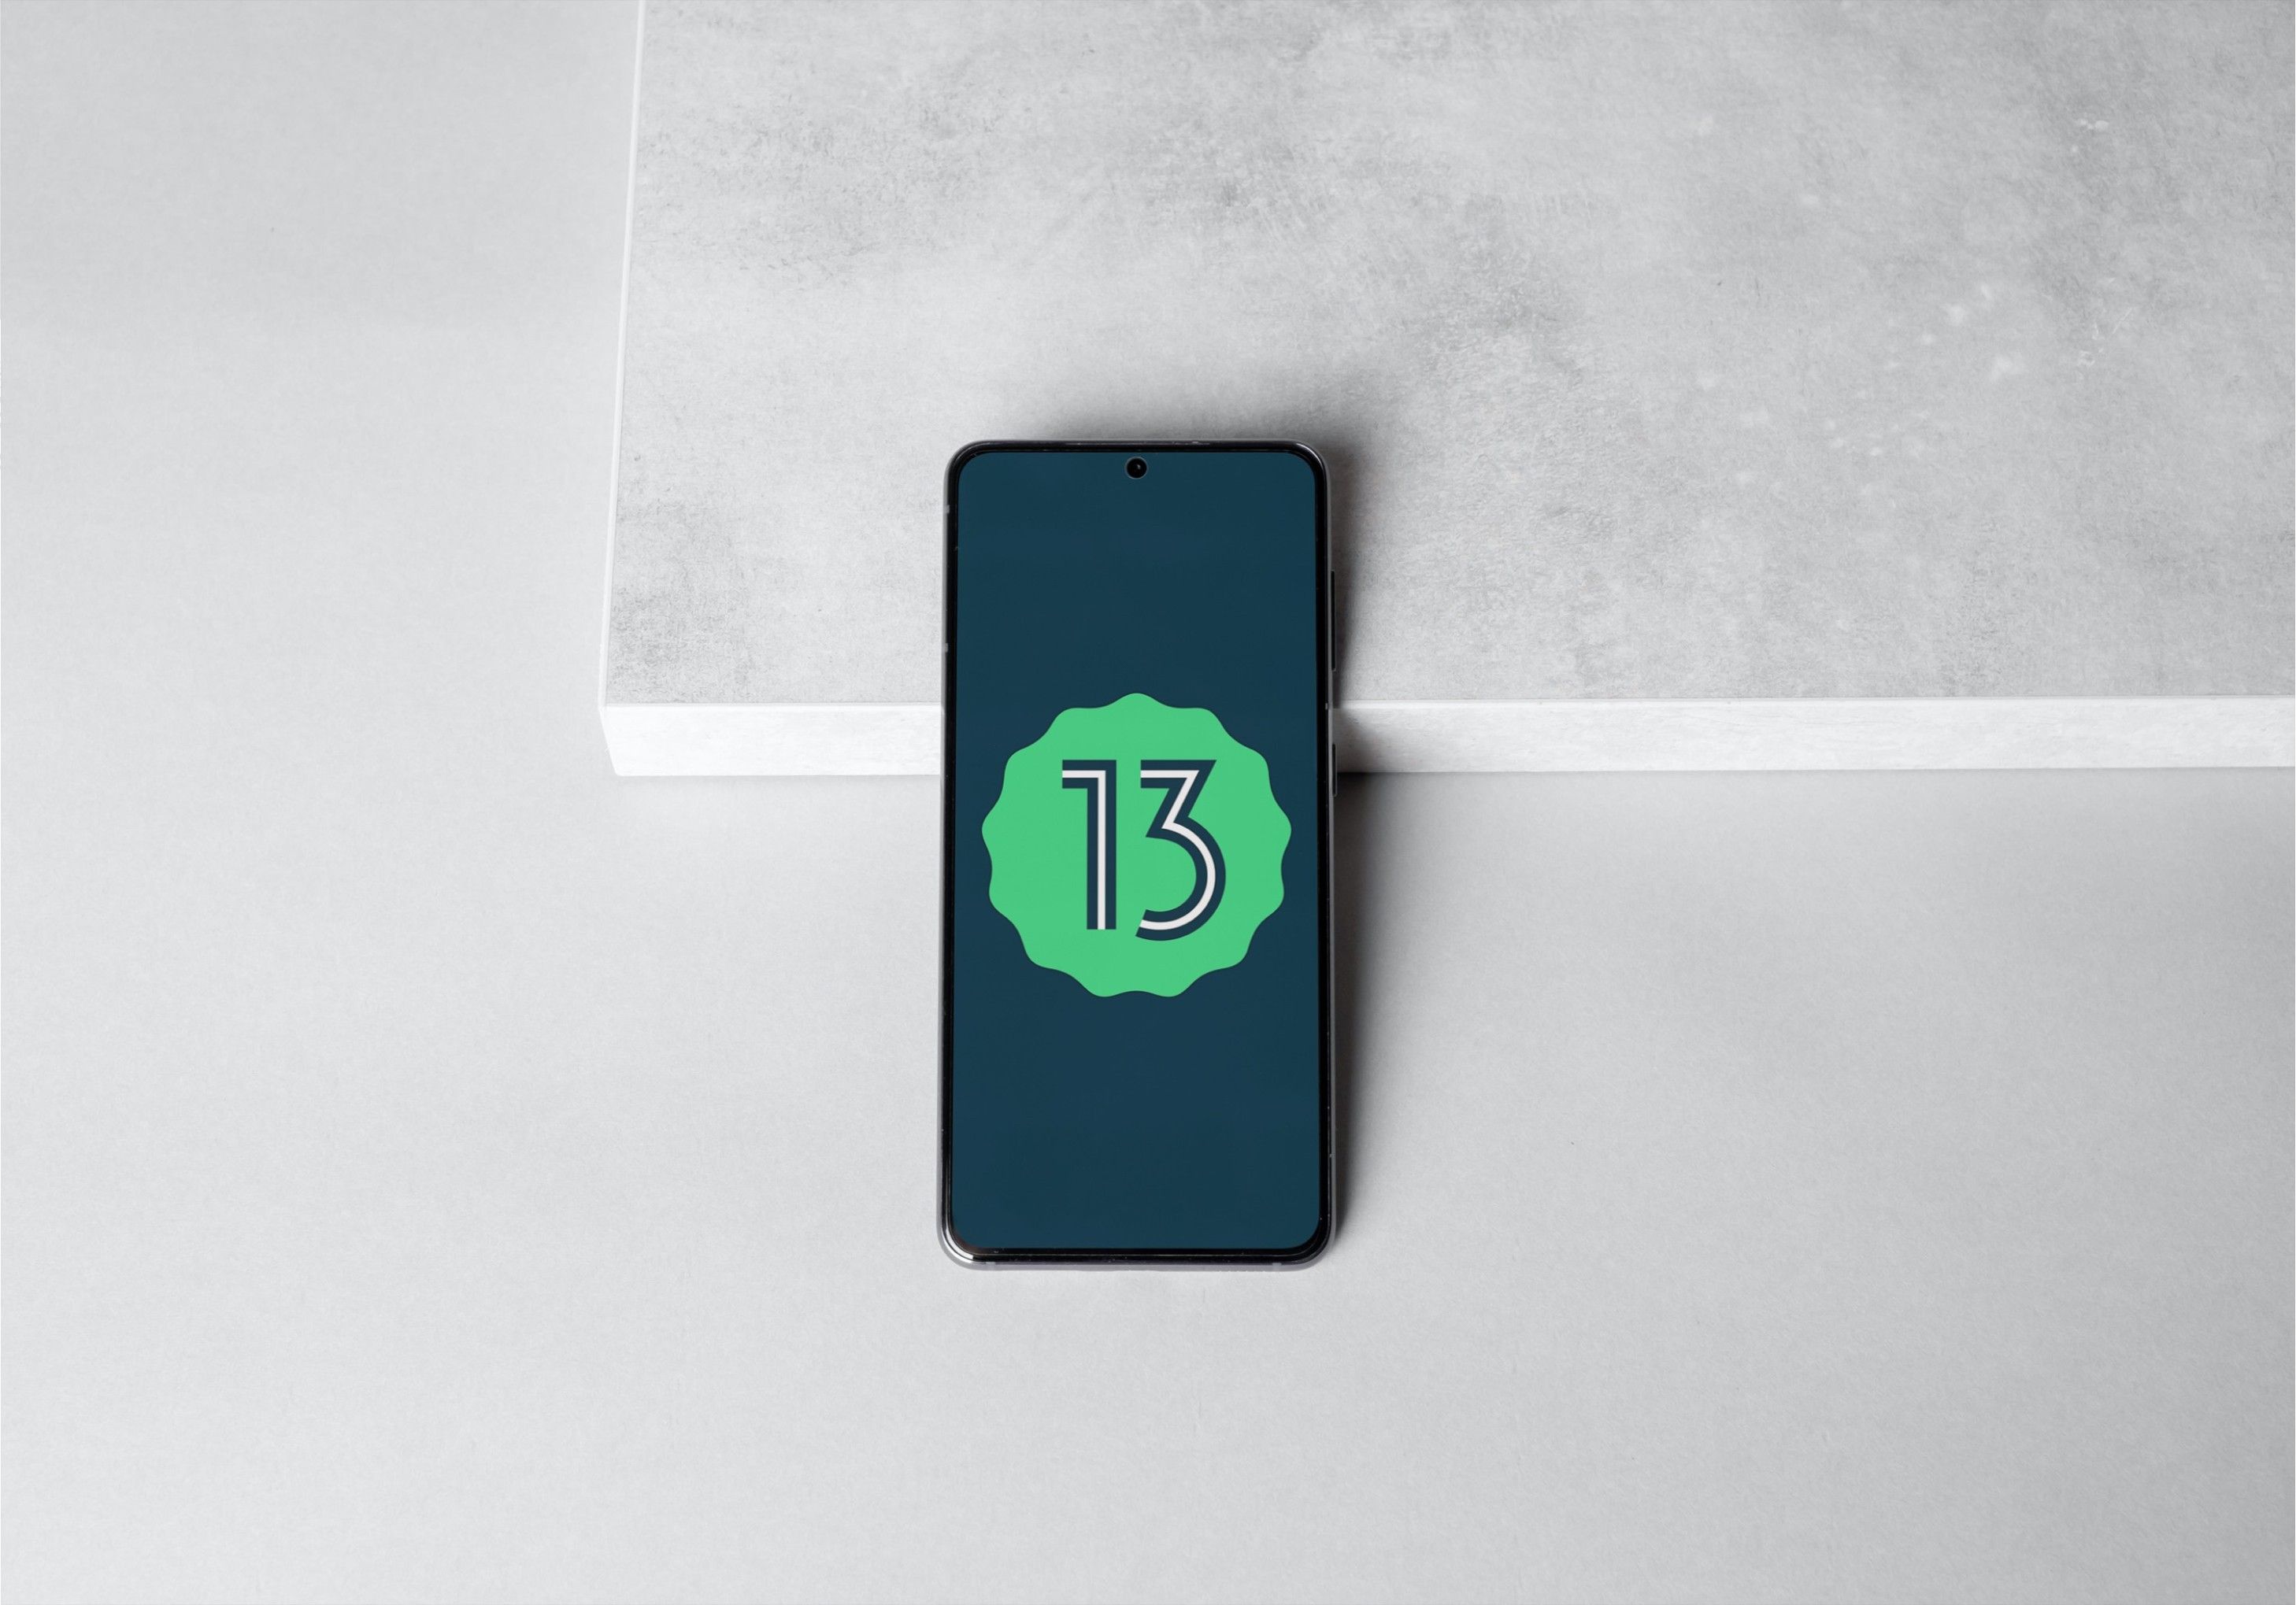 Android 13 logo on smartphone